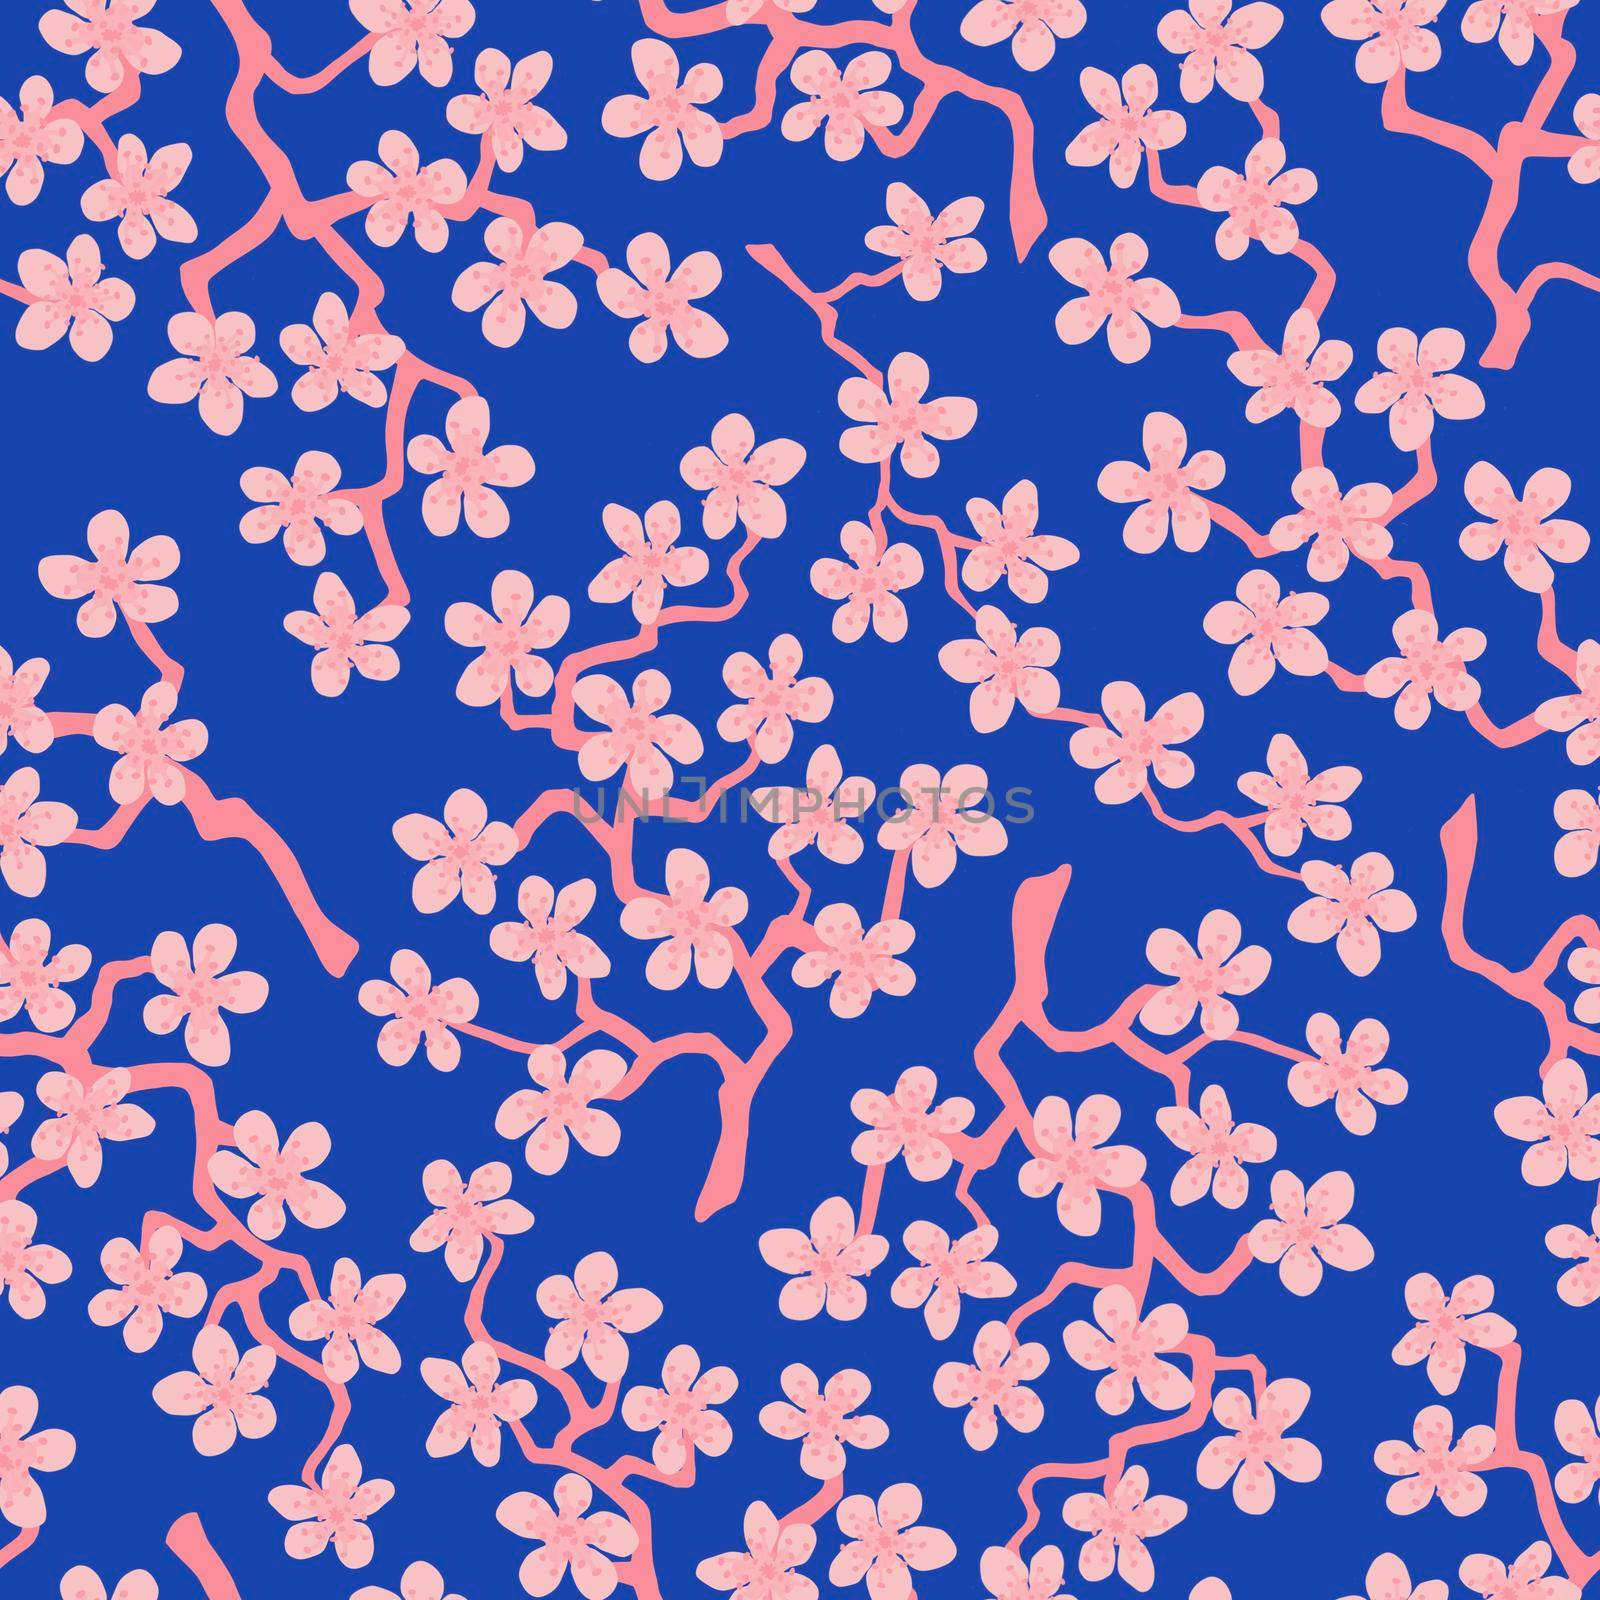 Seamless pattern with blossoming Japanese cherry sakura branches for fabric,packaging,wallpaper,textile decor,design, invitations,cards,print,gift wrap,manufacturing.Pink flowers on azure background